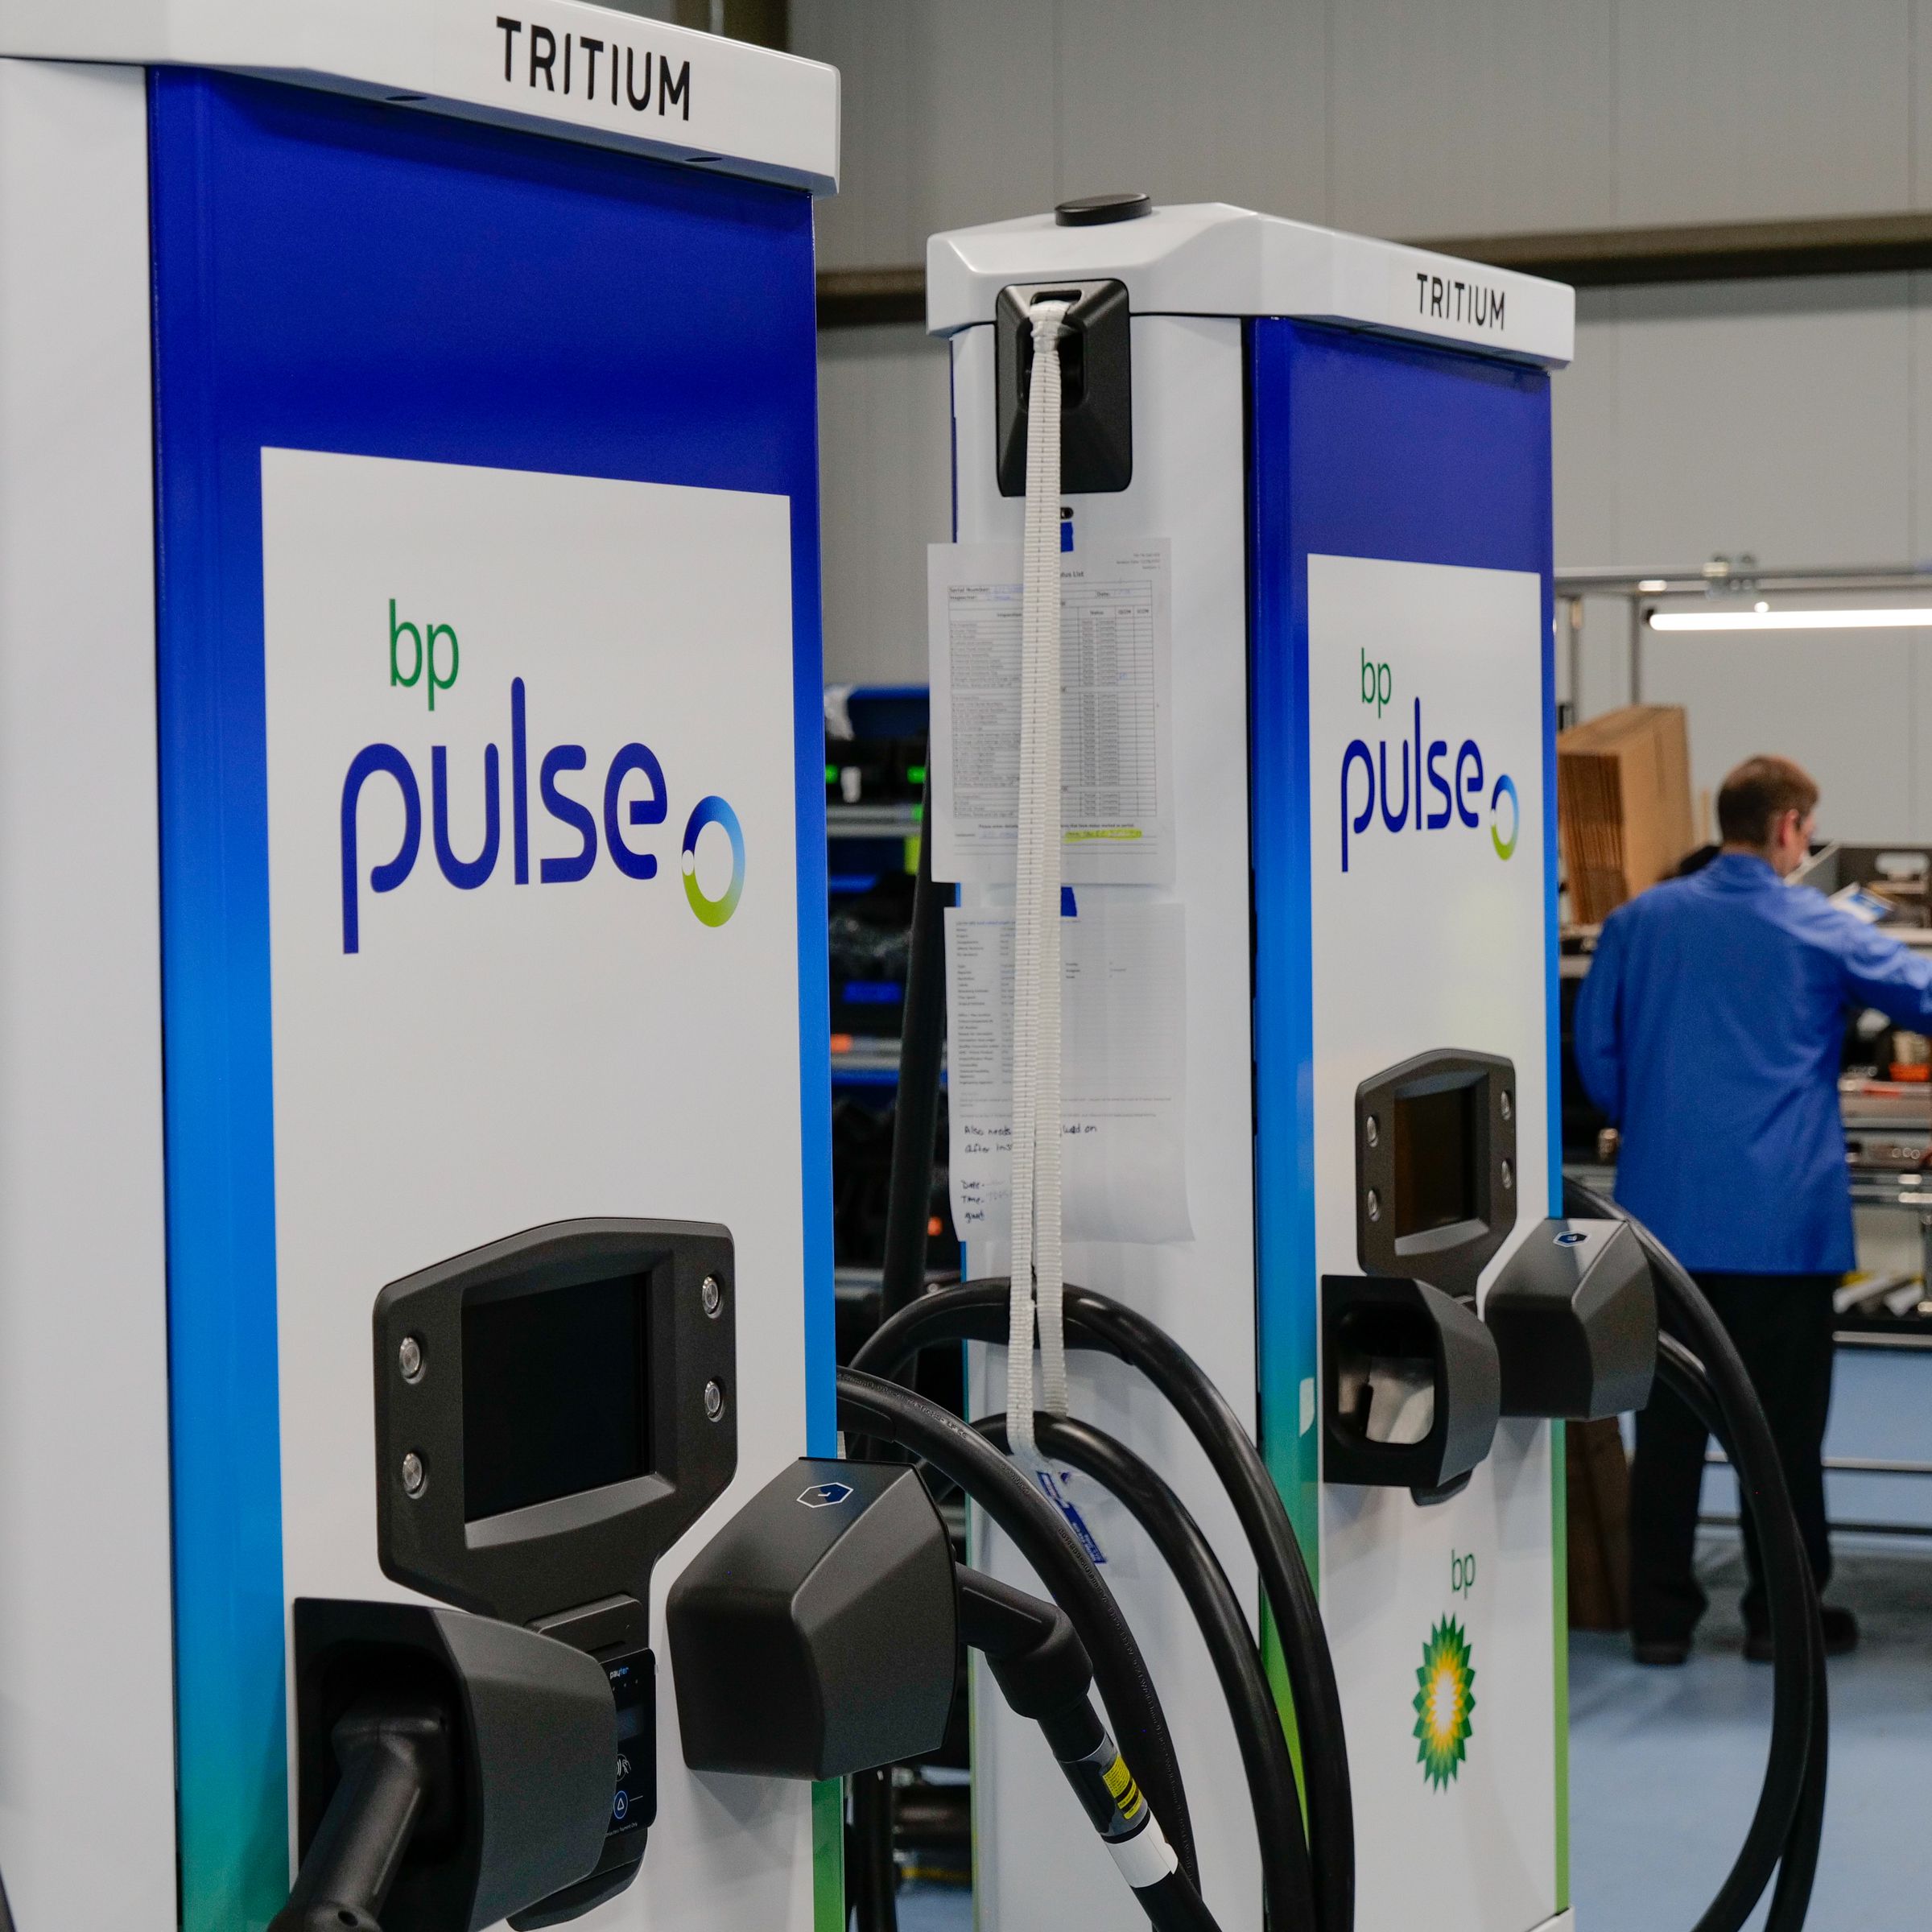 Two charging stations are in a production facility with people working in the background. The chargers have Tritium logos on the top and BP Pulse logos on the center, and each have two charging plugs.